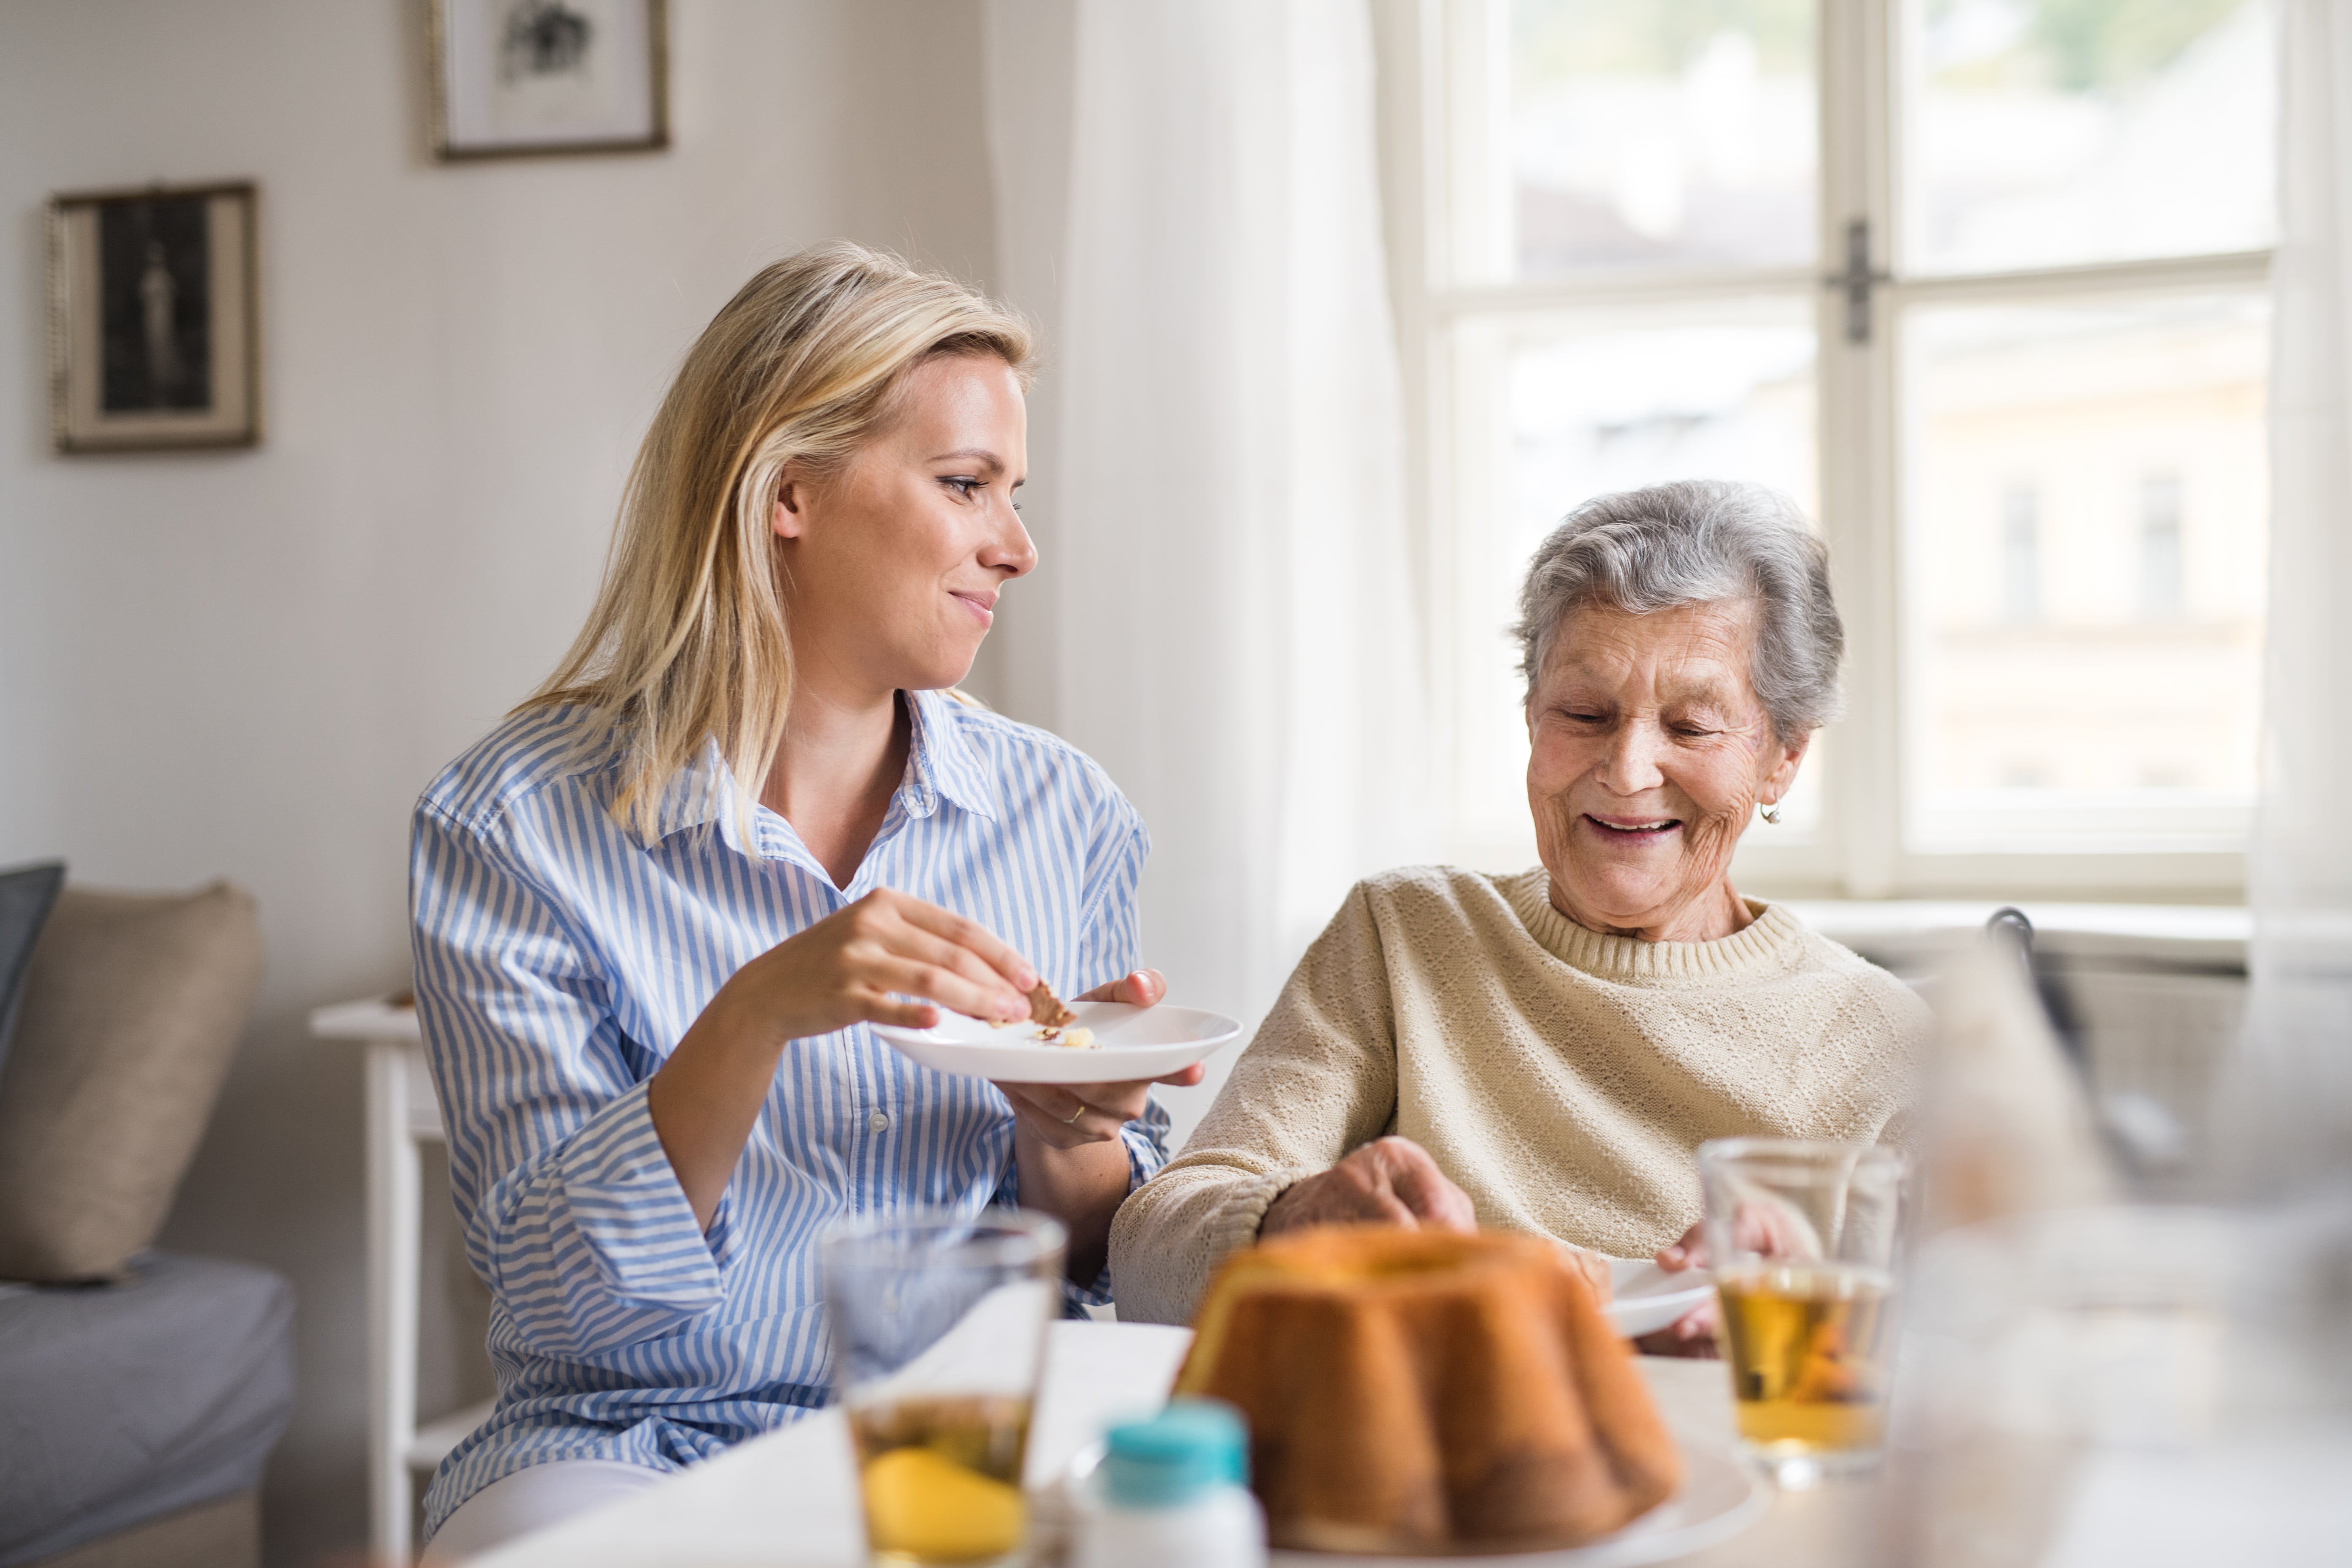 A caregiver helping an older loved one with dementia during mealtime